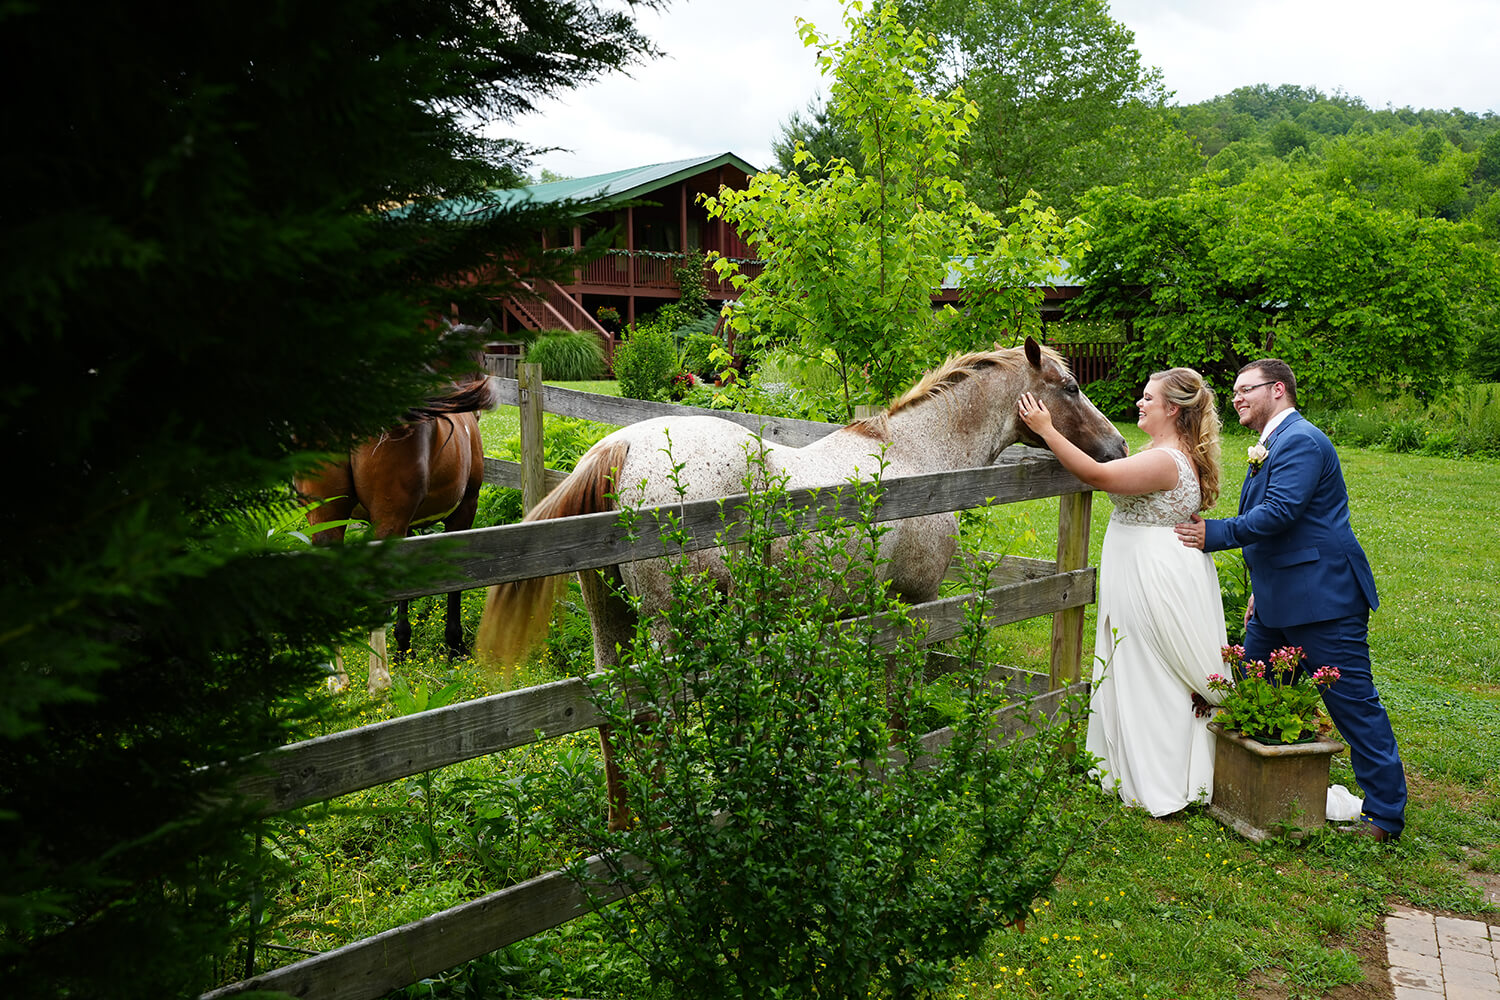 Wedding couple petting the horses at Honeysuckle Hills across a wooden fence